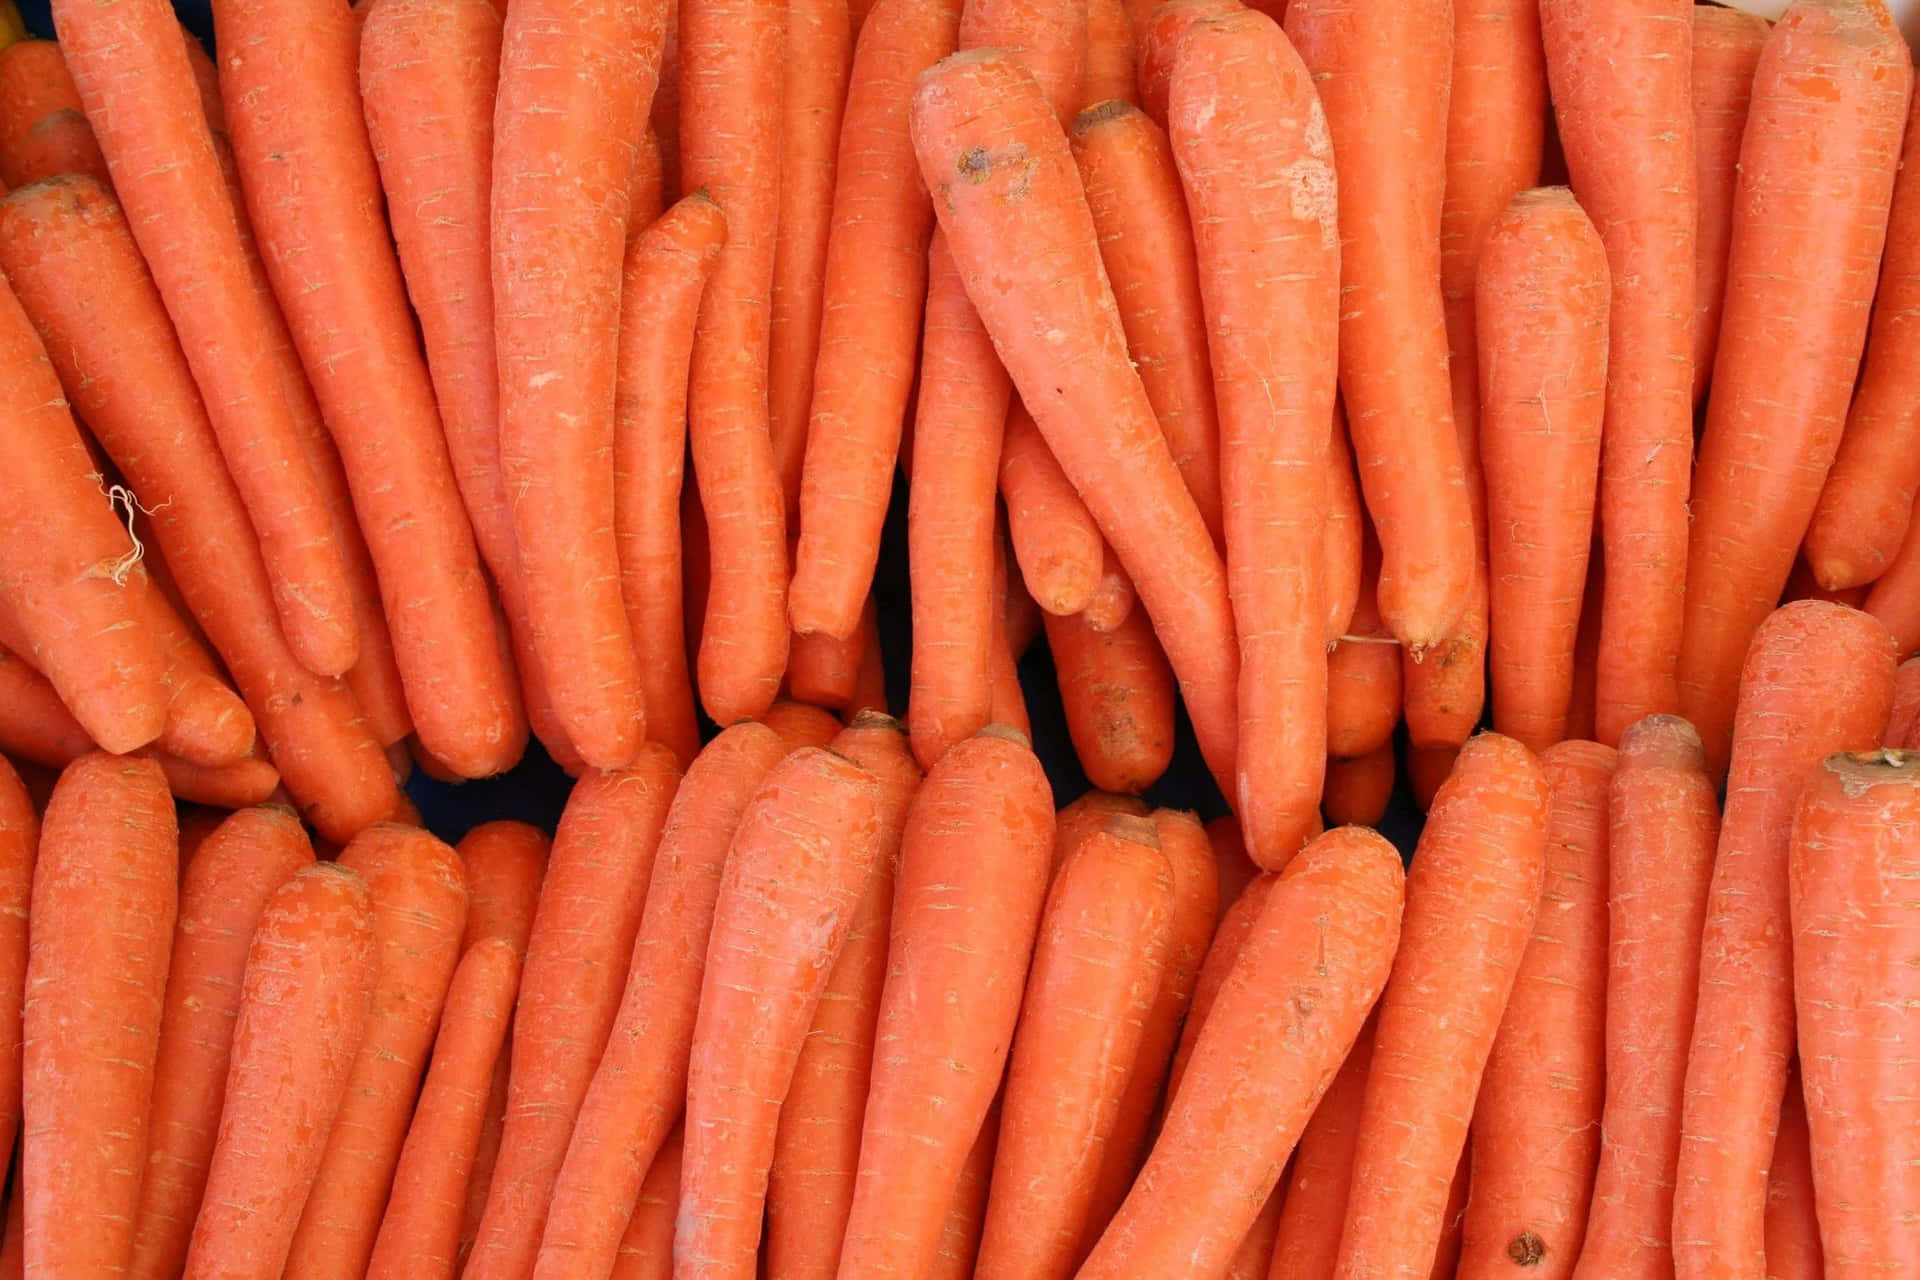 A Bunch Of Carrots